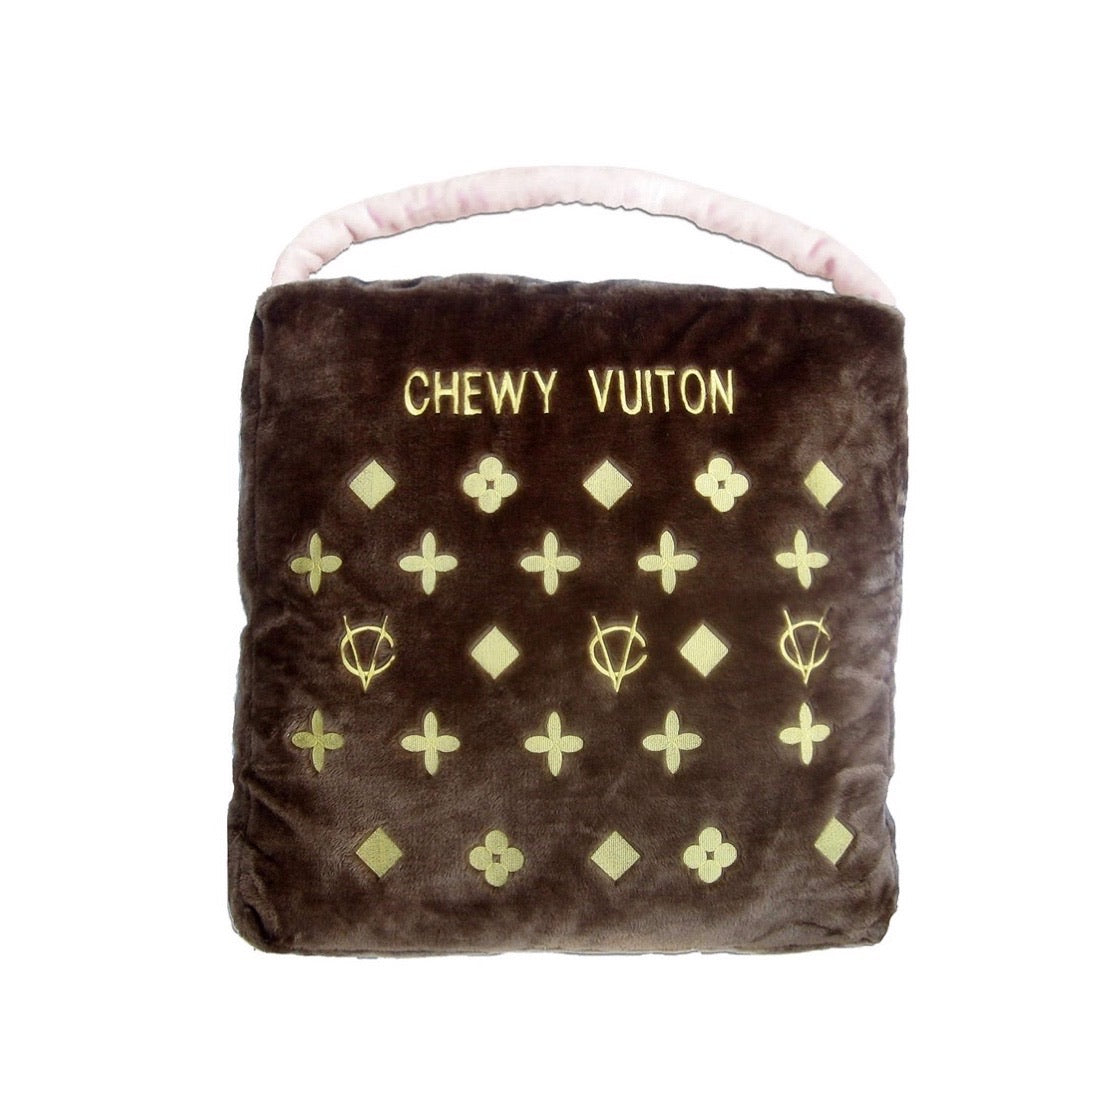 Chewy Vuitton Leather Bed